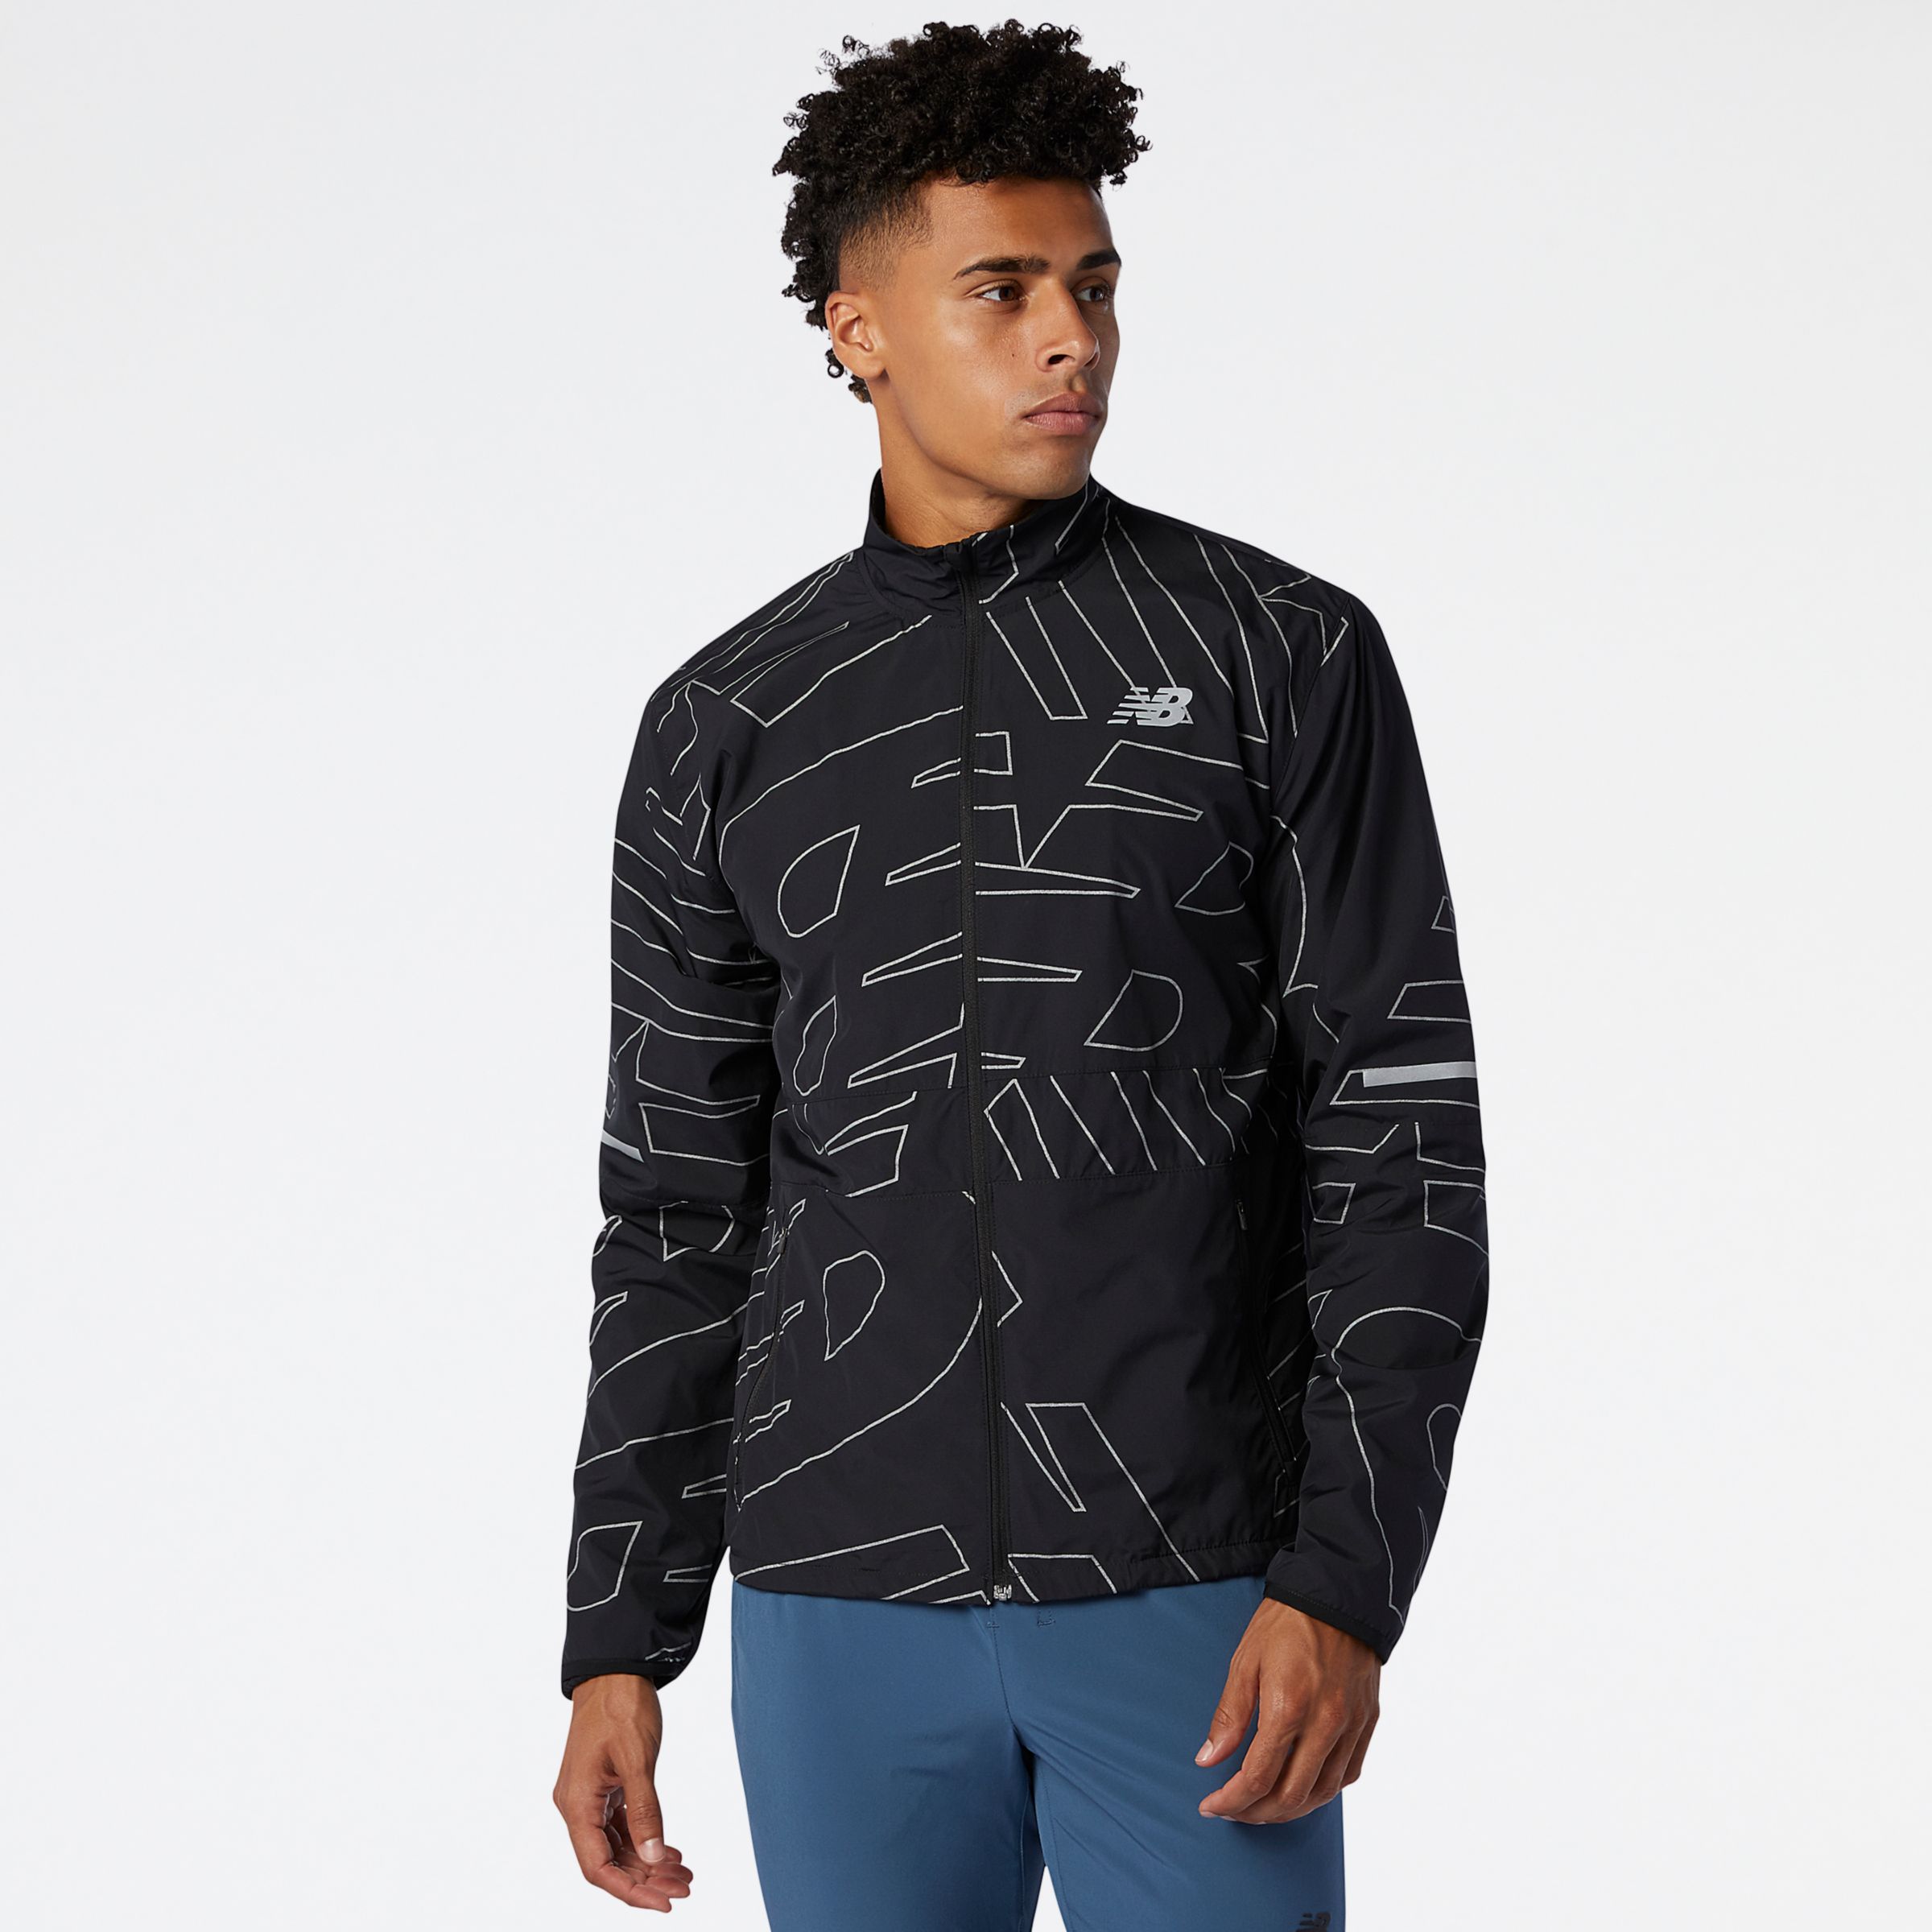 Reflective Accelerate Protect Jacket 